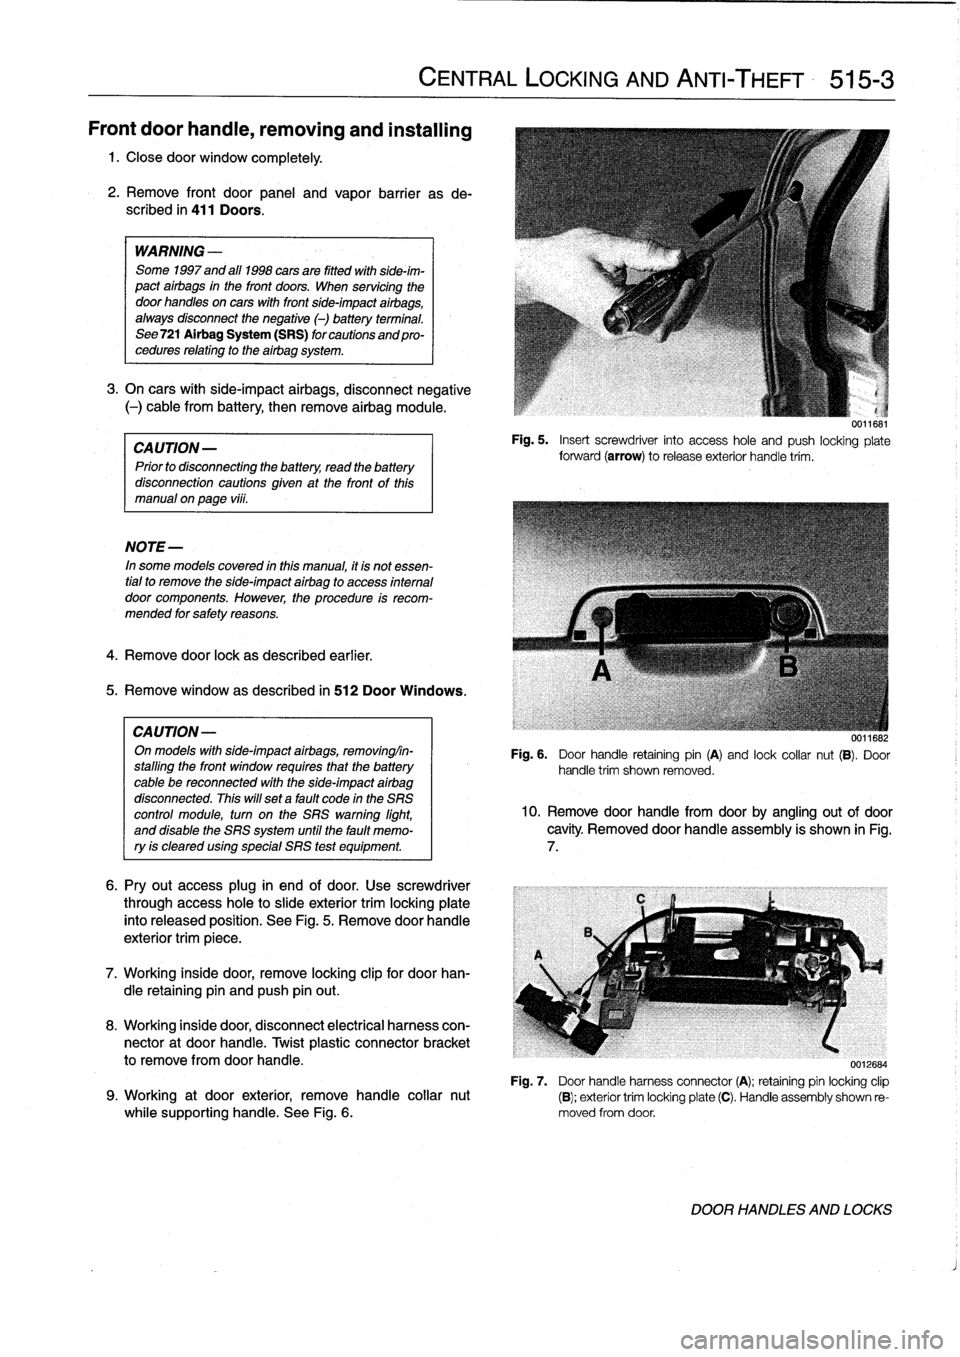 BMW 323i 1995 E36 Service Manual 
Front
door
handle,
removing
and
installing

1
.
Closedoor
window
completely
.

2
.
Remove
front
door
panel
and
vapor
barrier
asde-
scribed
in
411
Doors
.

WARNING
-

Some
1997
and
al]
1998
cars
are
f